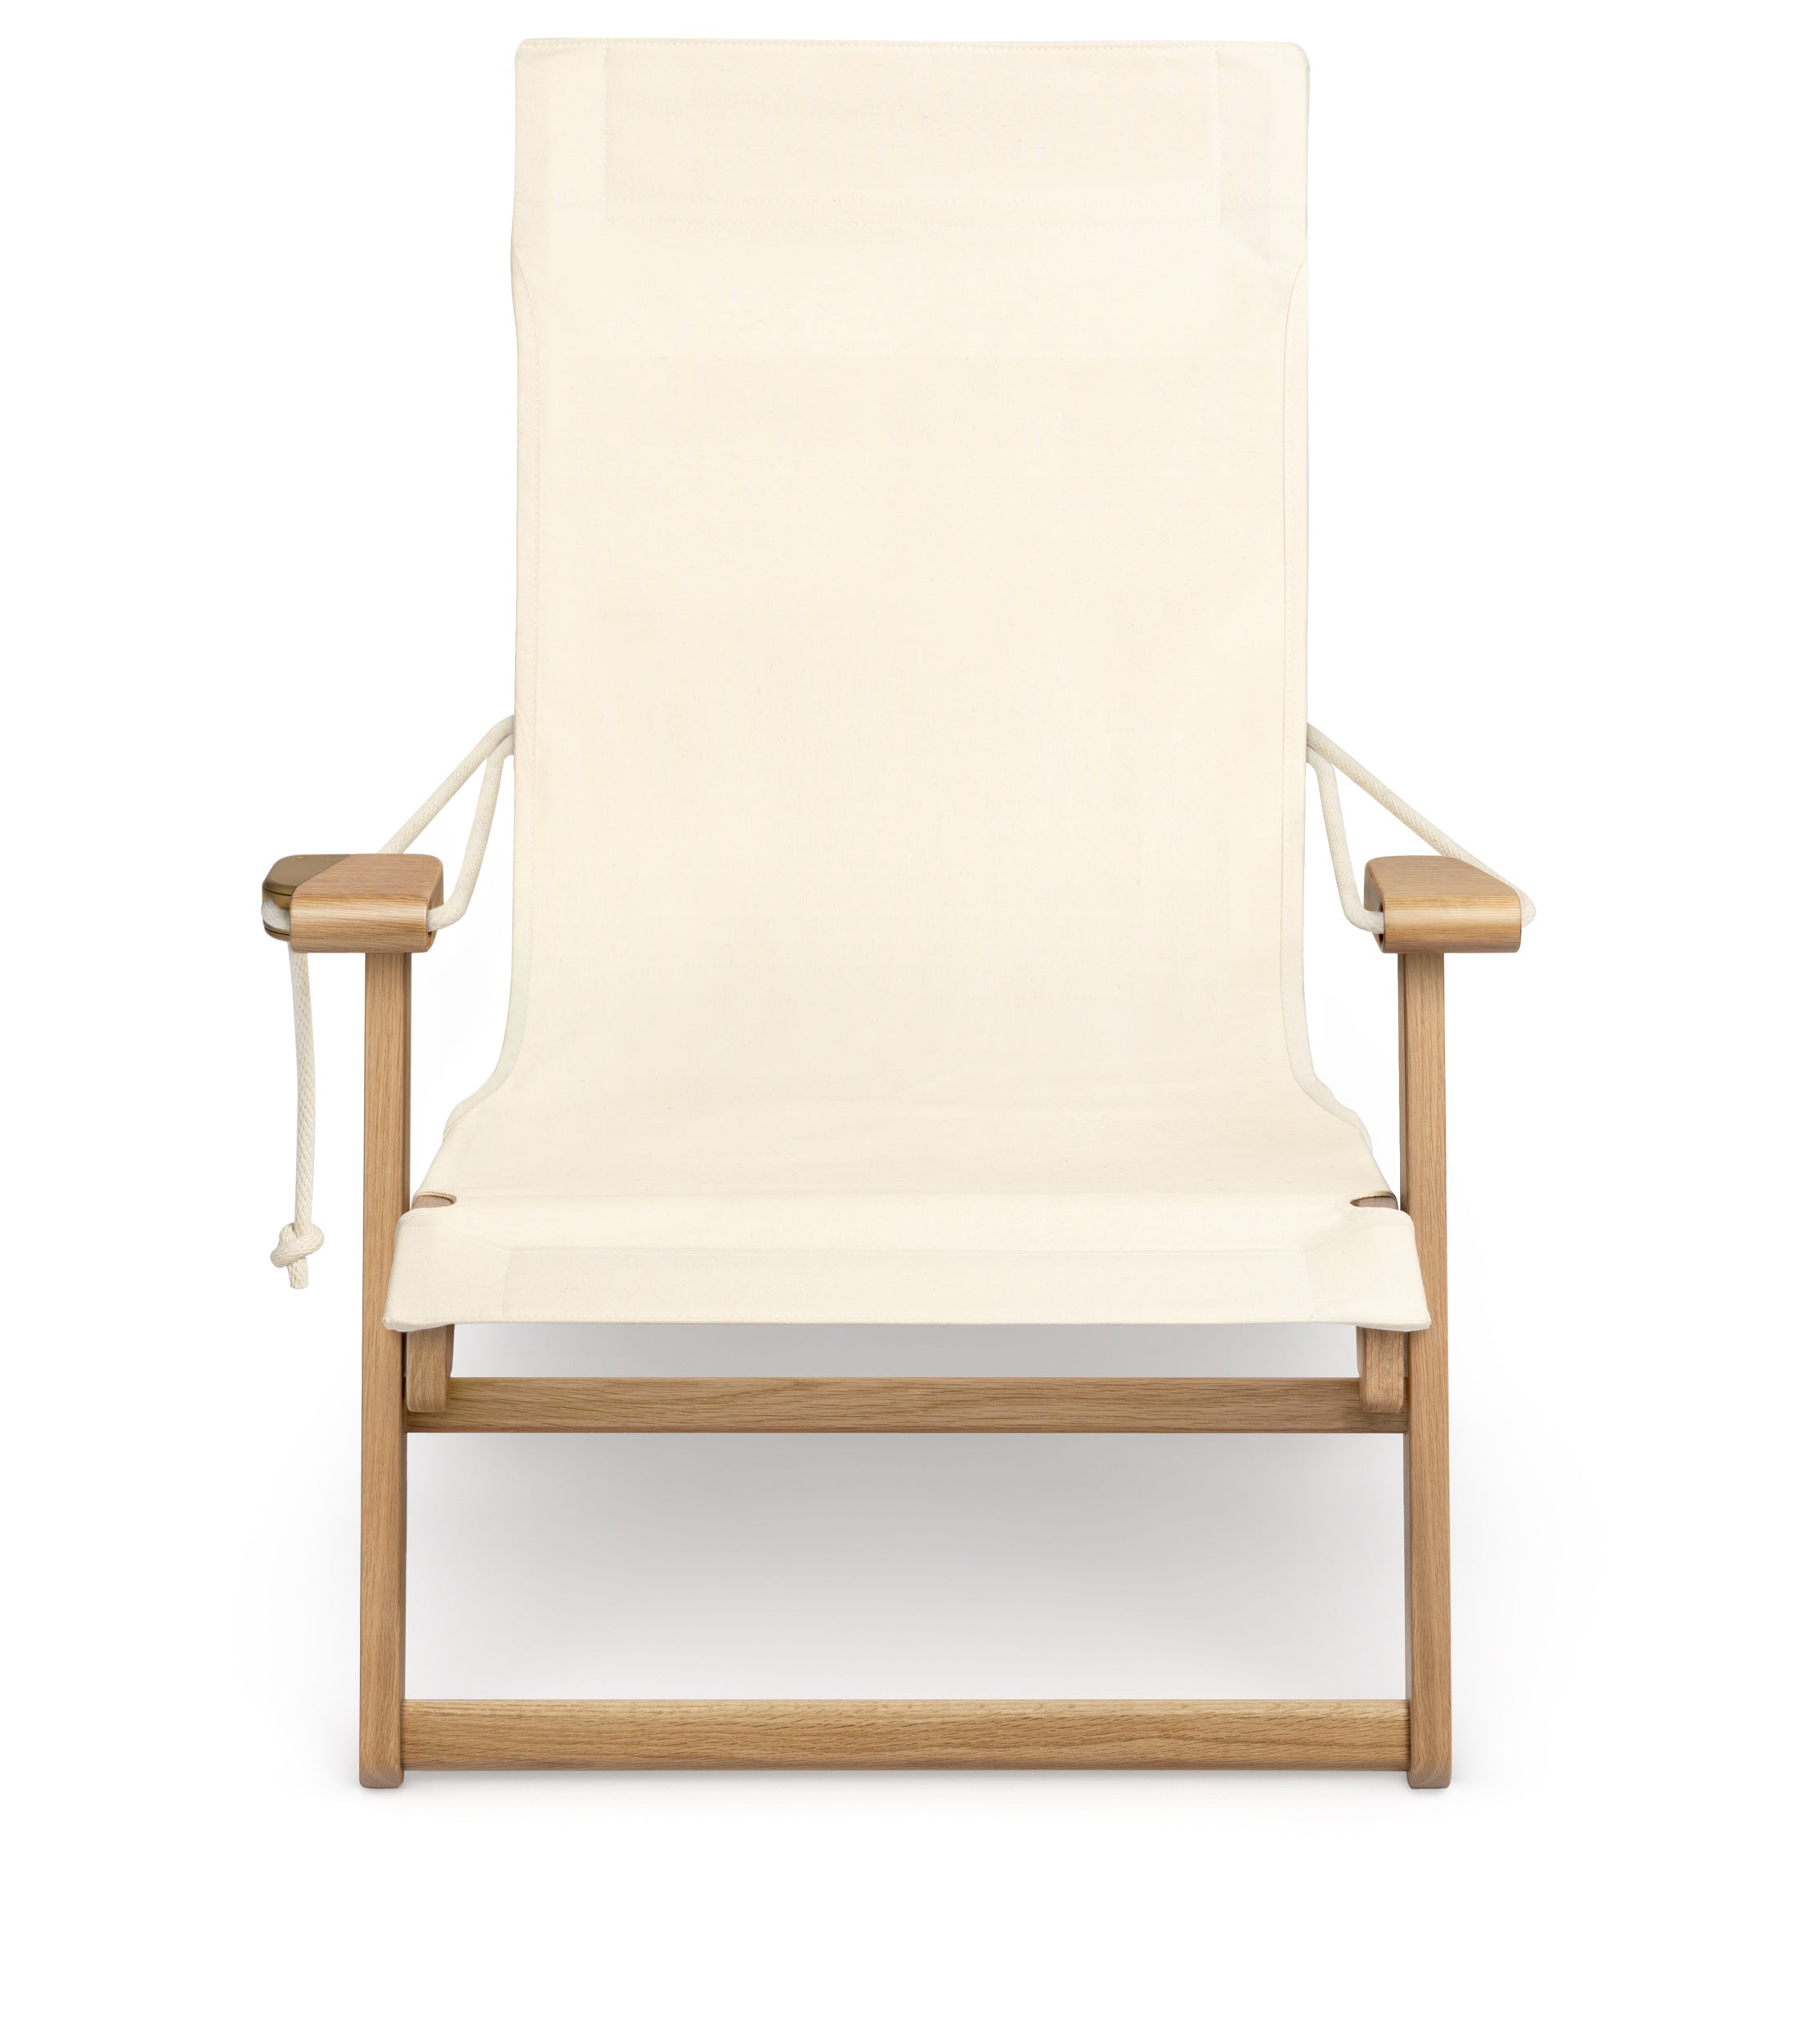 Front-facing image of the Shorebird Beach Chair on a white background